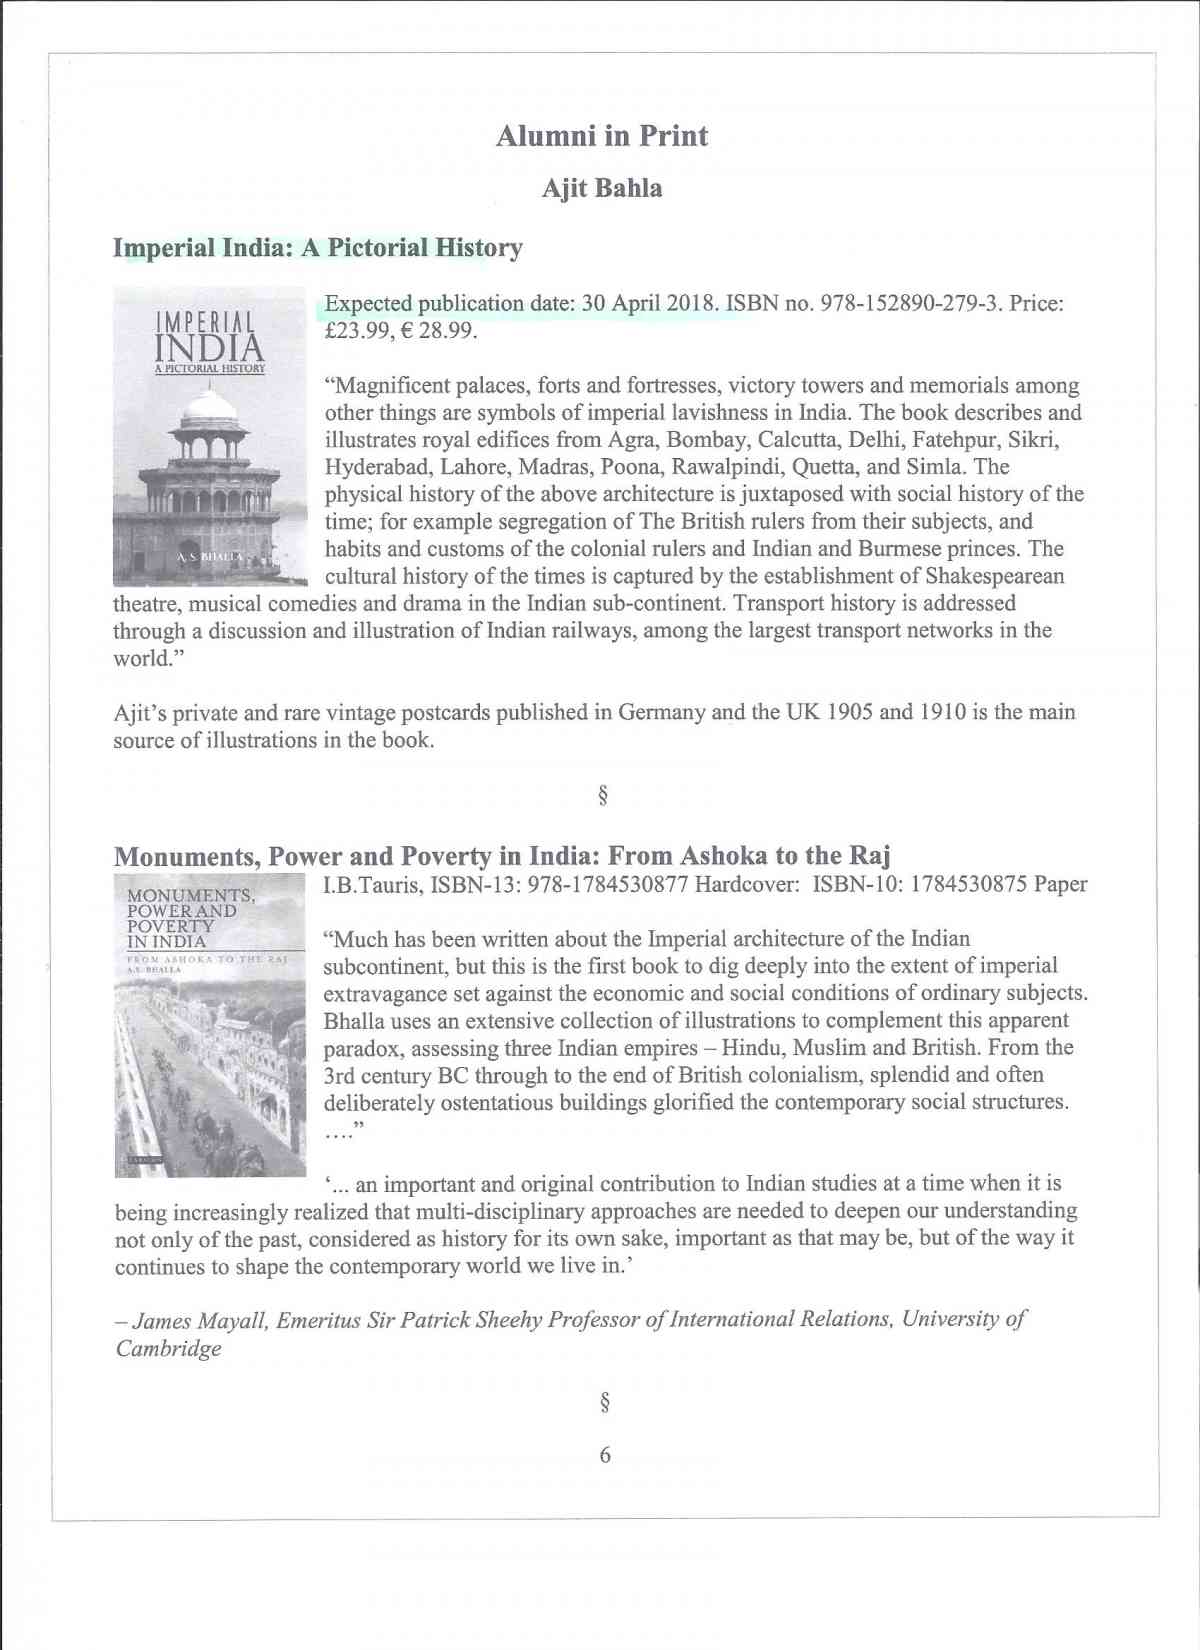 Imperial-India-A-Pictorial-History-A-S-Bhalla-featured-at-IDRC-Alumni-Bulletin-austin-macauley-publishers